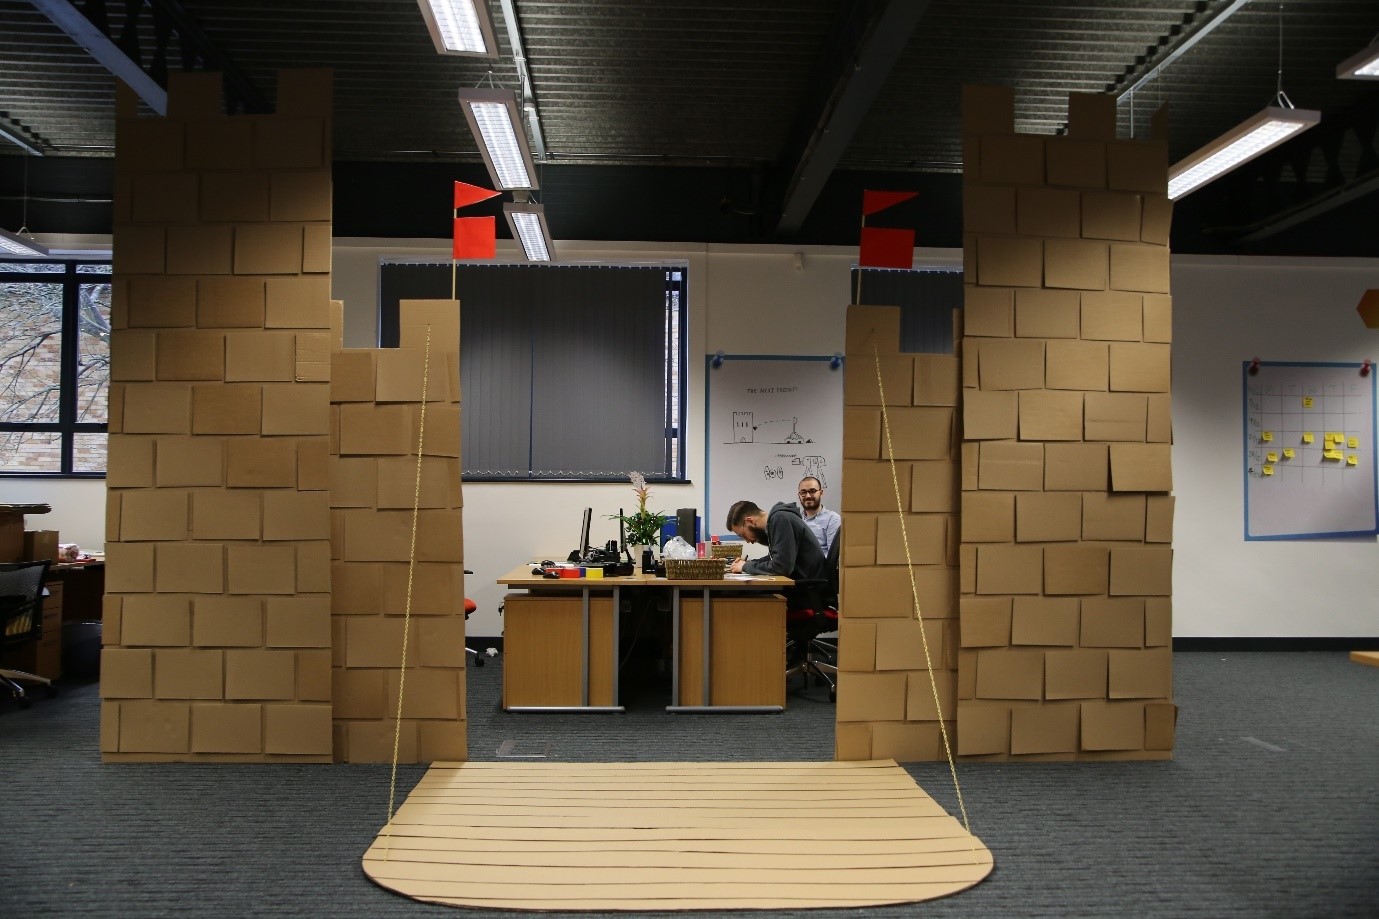 PHOTO: Coworkers Built a 10-Foot-Tall Cardboard Castle in Office